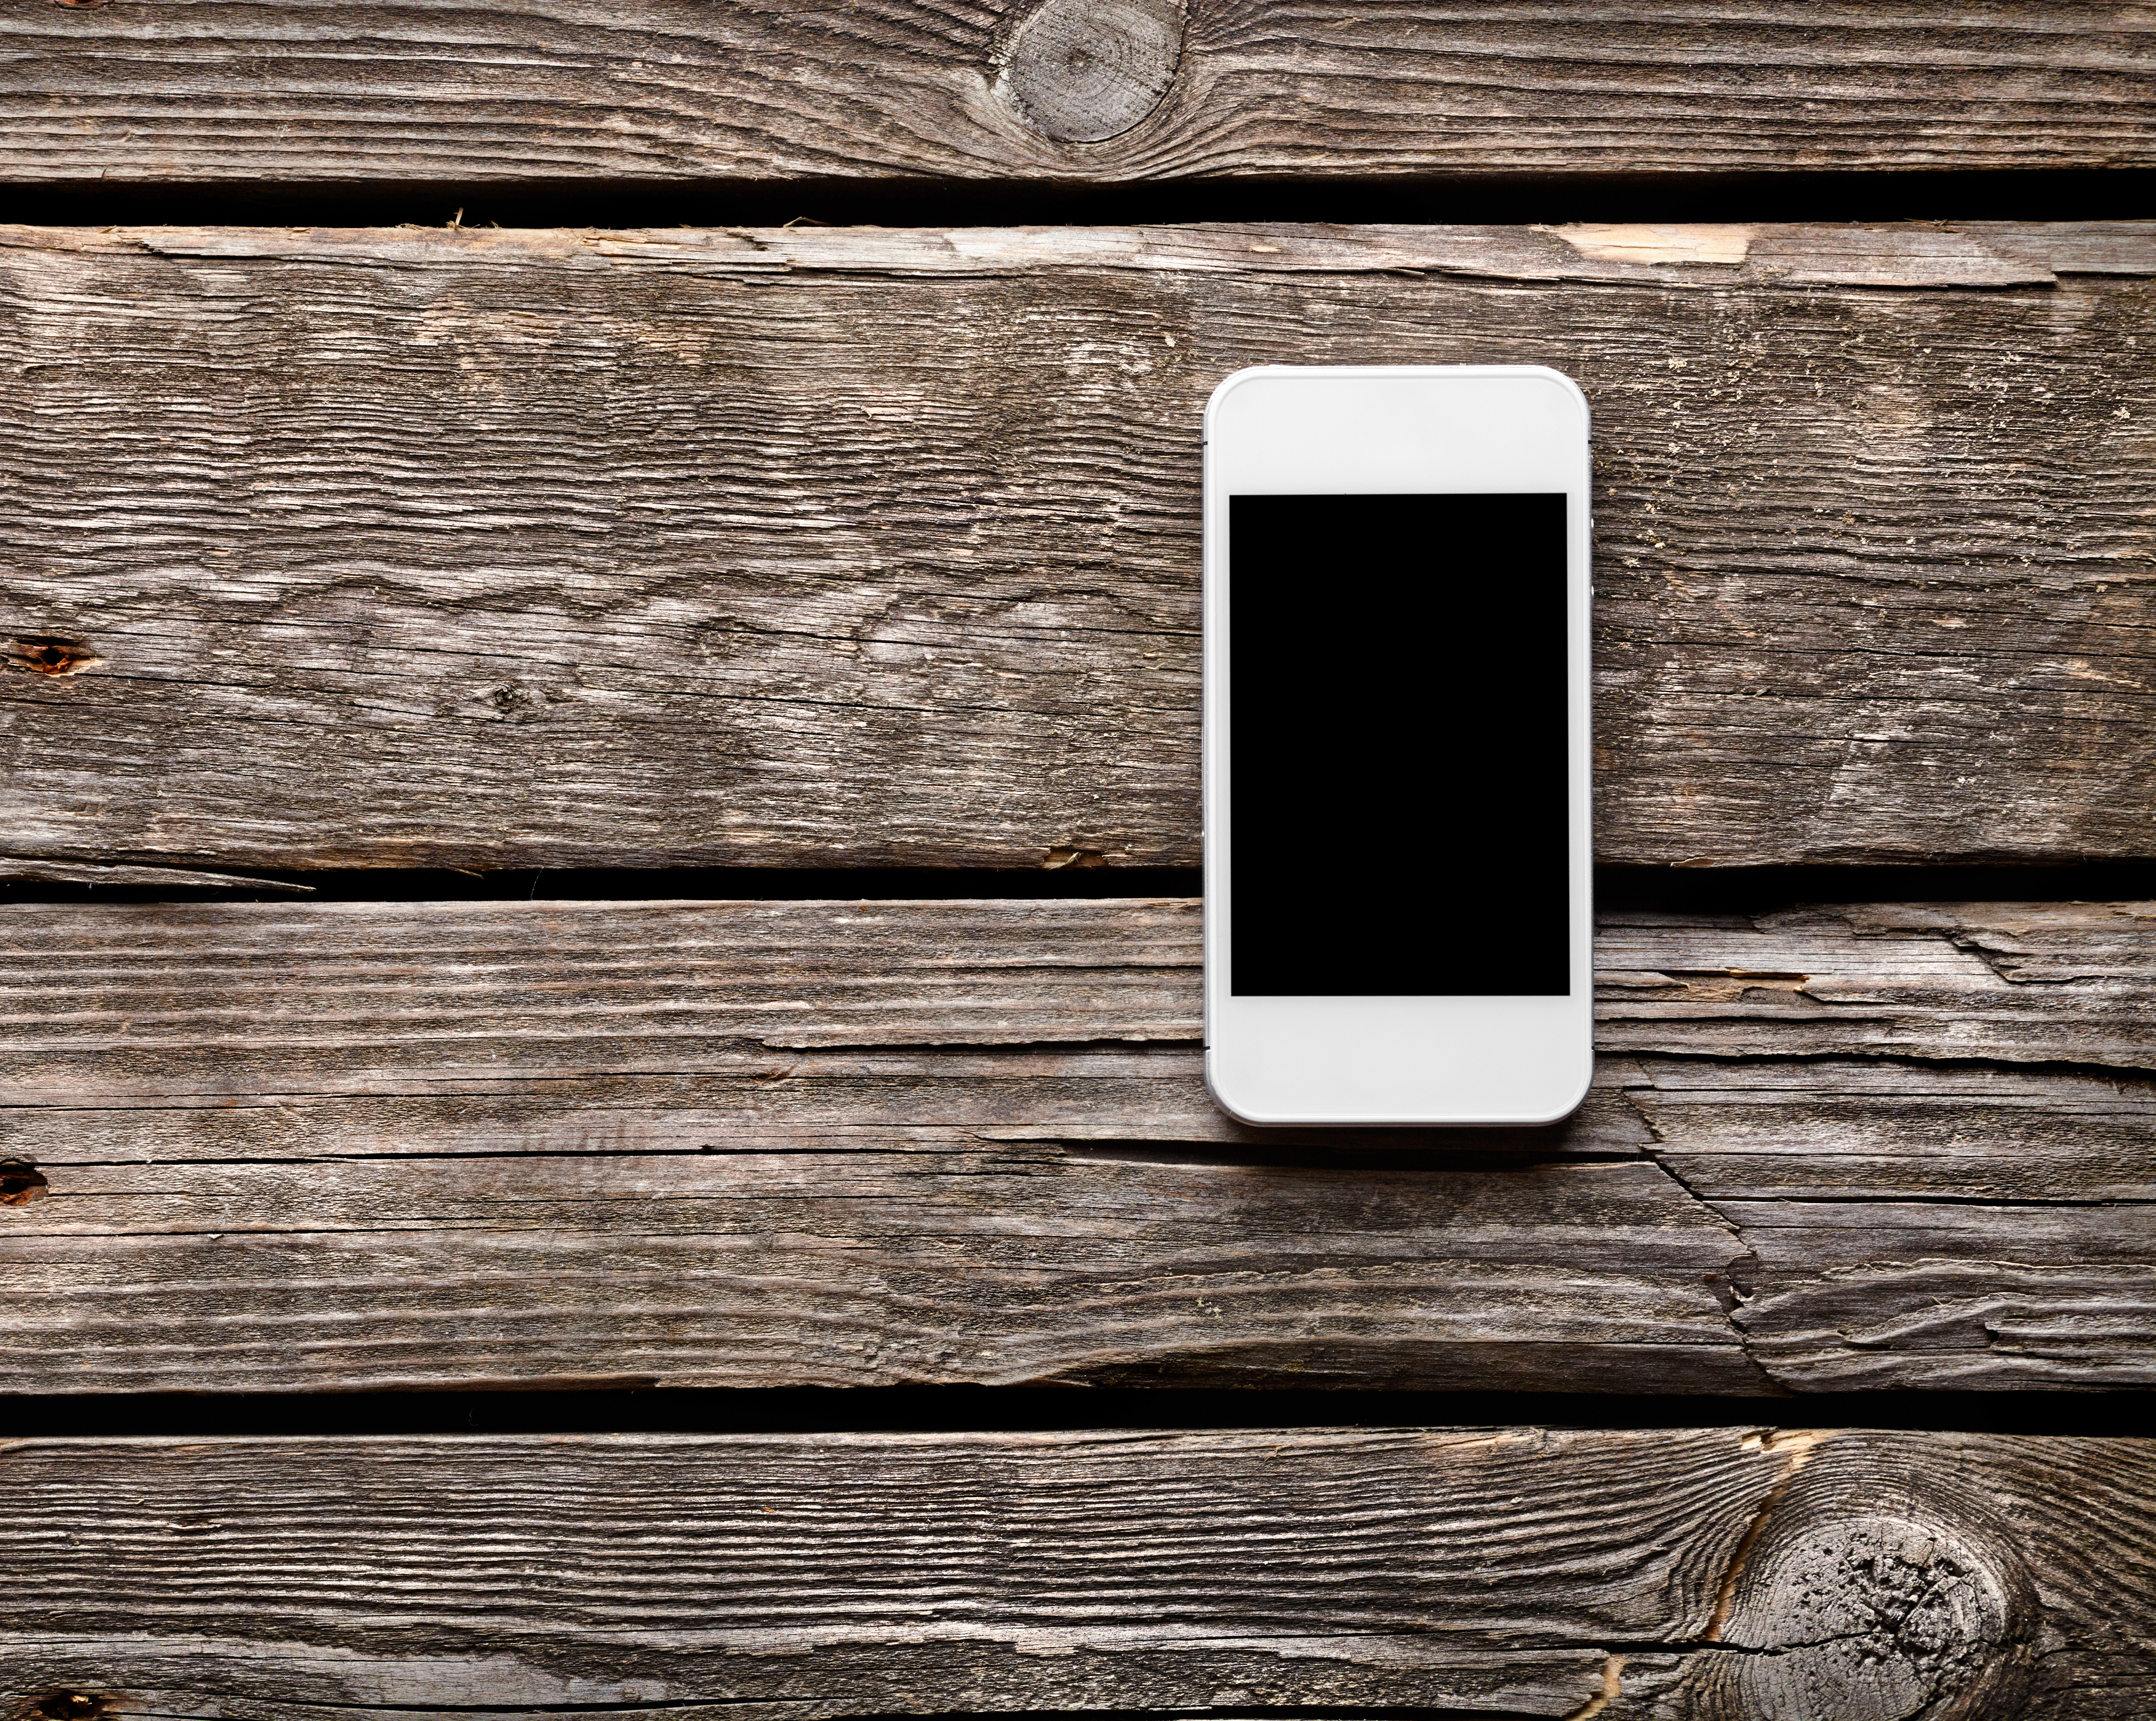 [Guest Post] Why mobile is the next big thing beyond online and social